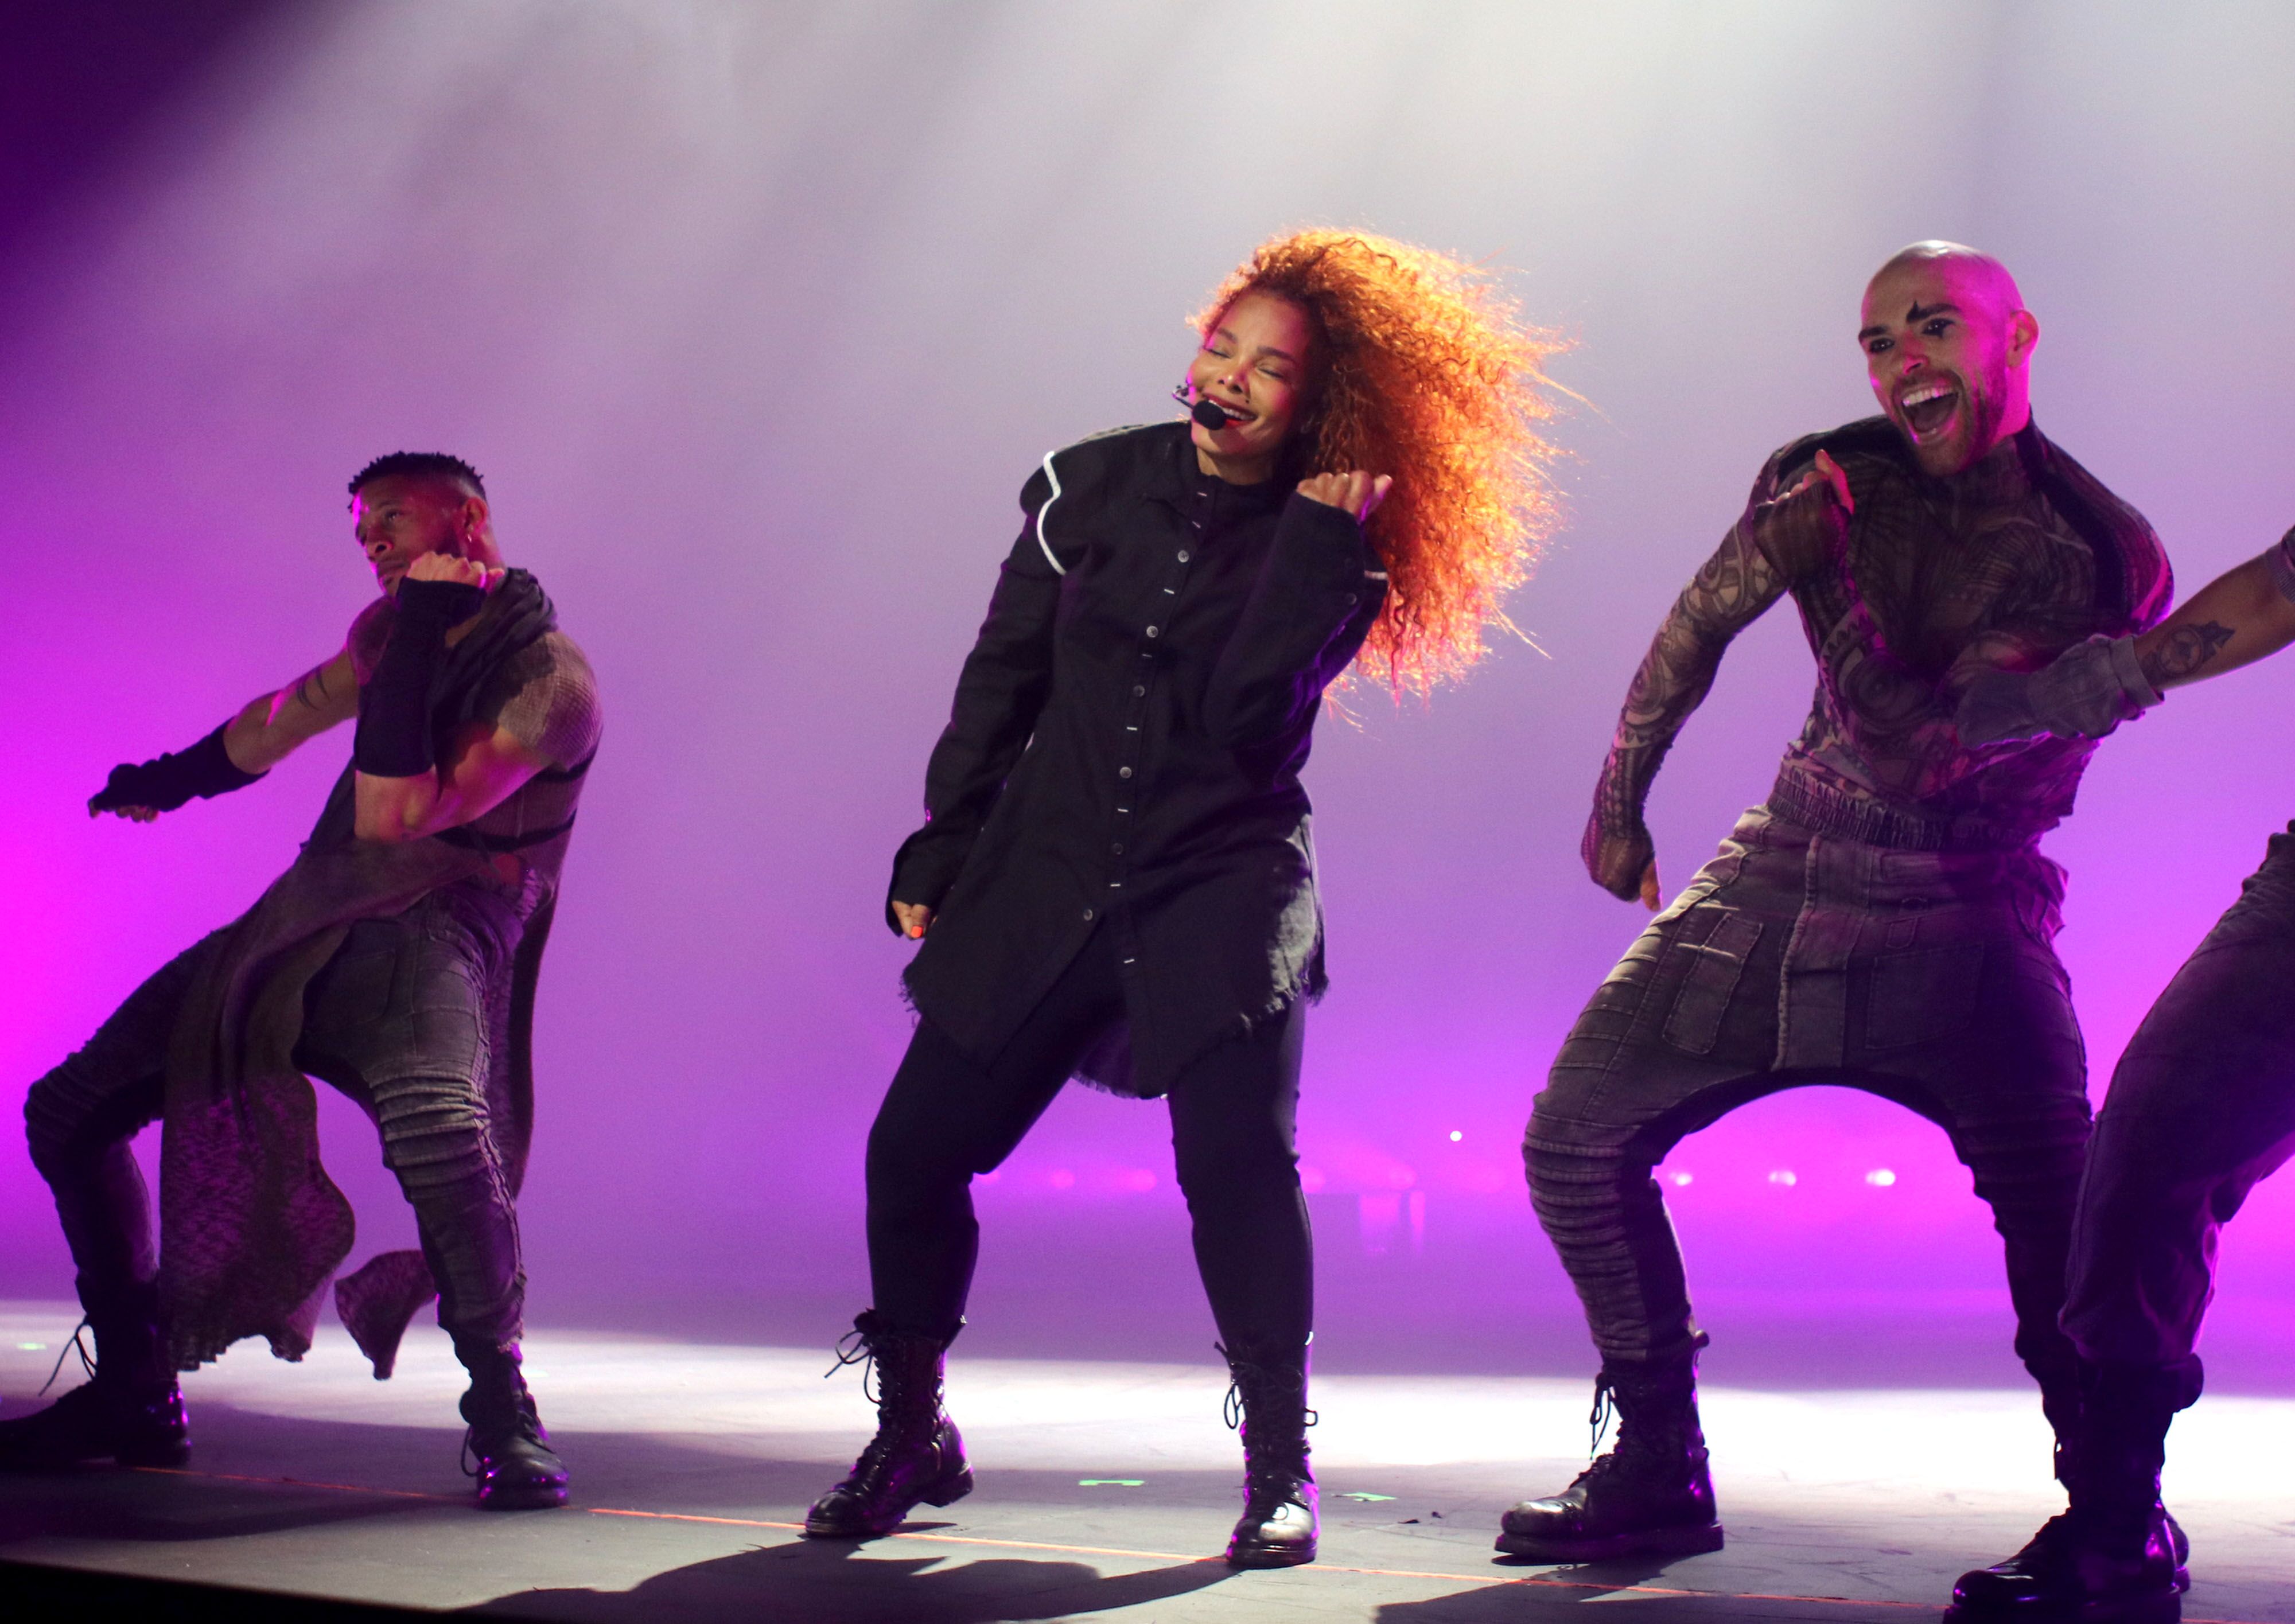 R&B star Janet Jackson performing during her 2019 Concert Tour in Australia / Source: Getty Images